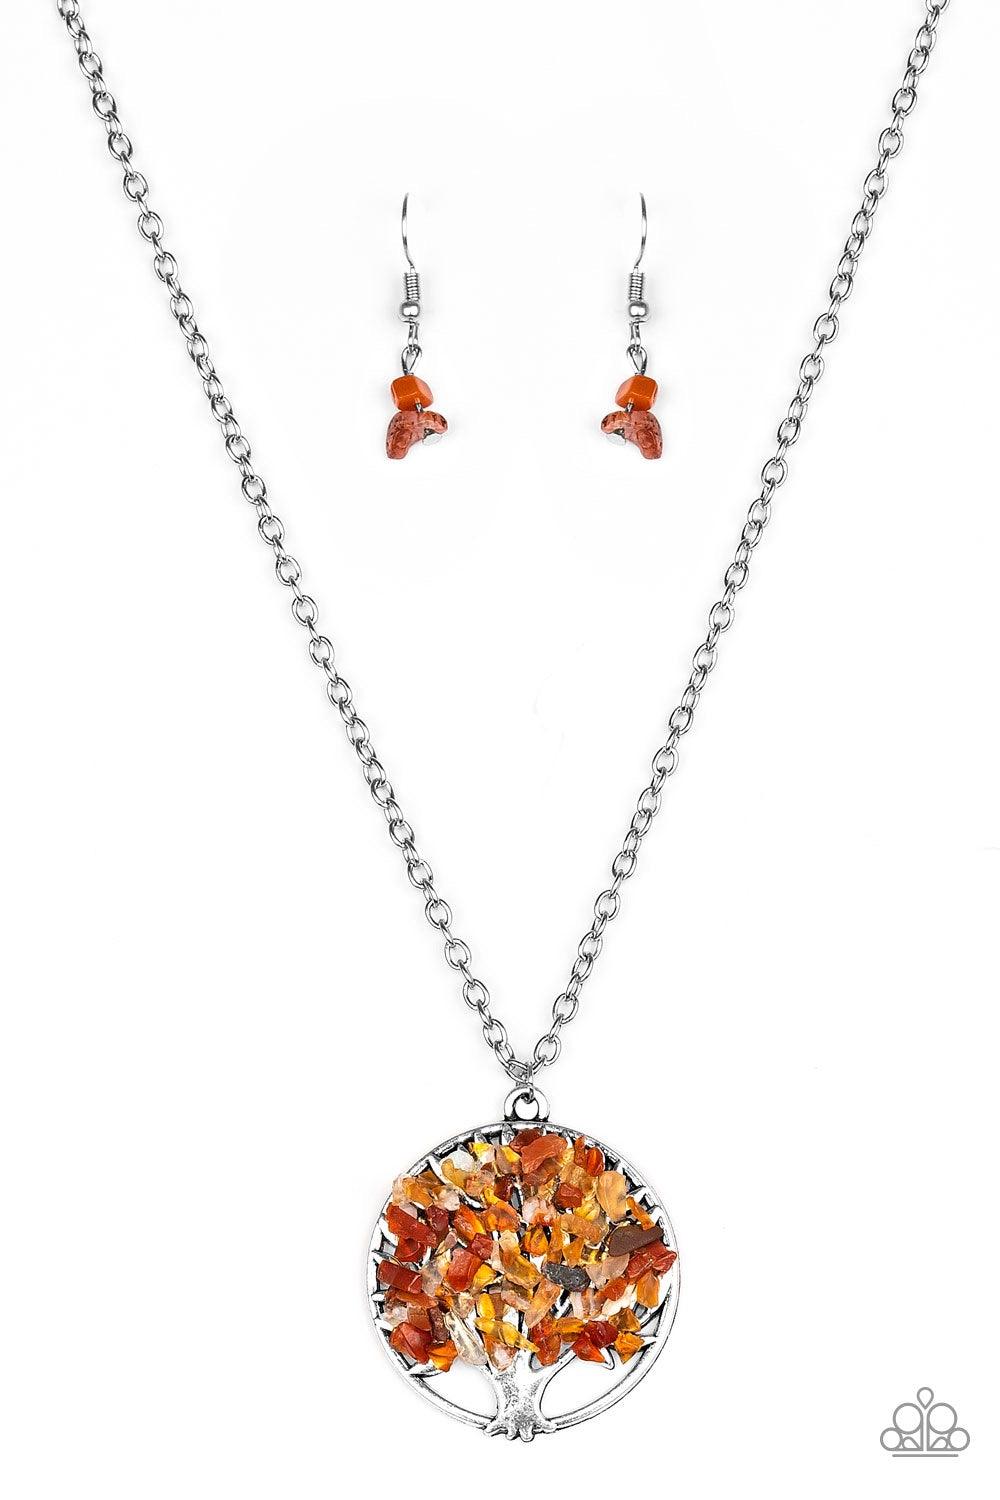 Paparazzi Accessories Naturally Nirvana - Orange Bits of orange rock are sprinkled along a shimmery silver tree pendant, creating colorful leaves. Features an adjustable clasp closure. Jewelry